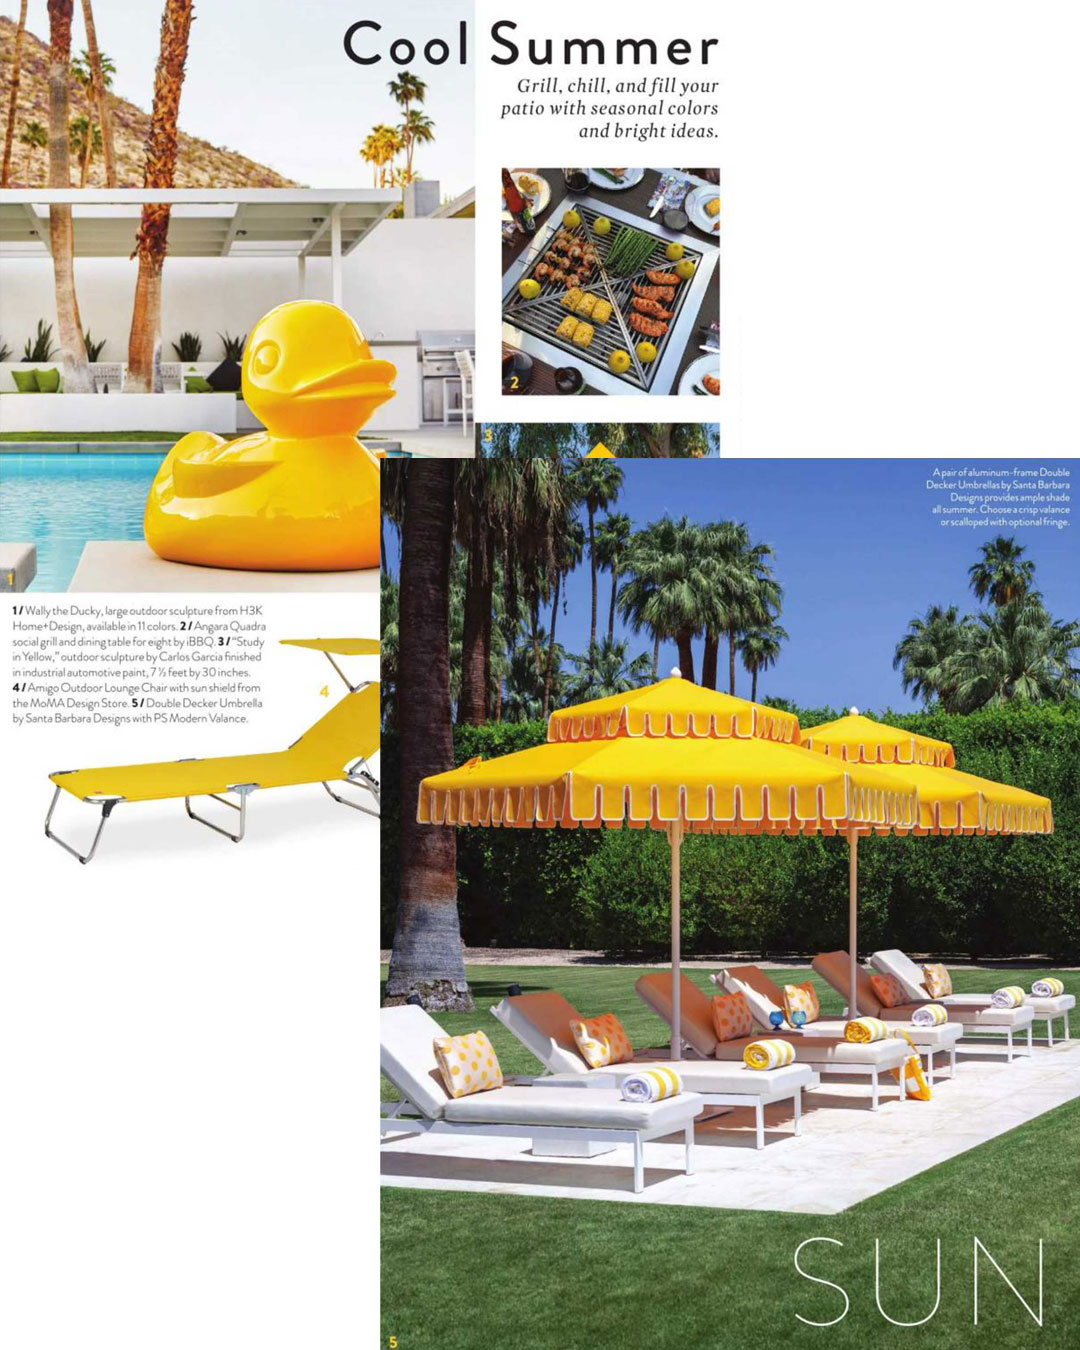 Image of editorial layout in Palm Springs Life